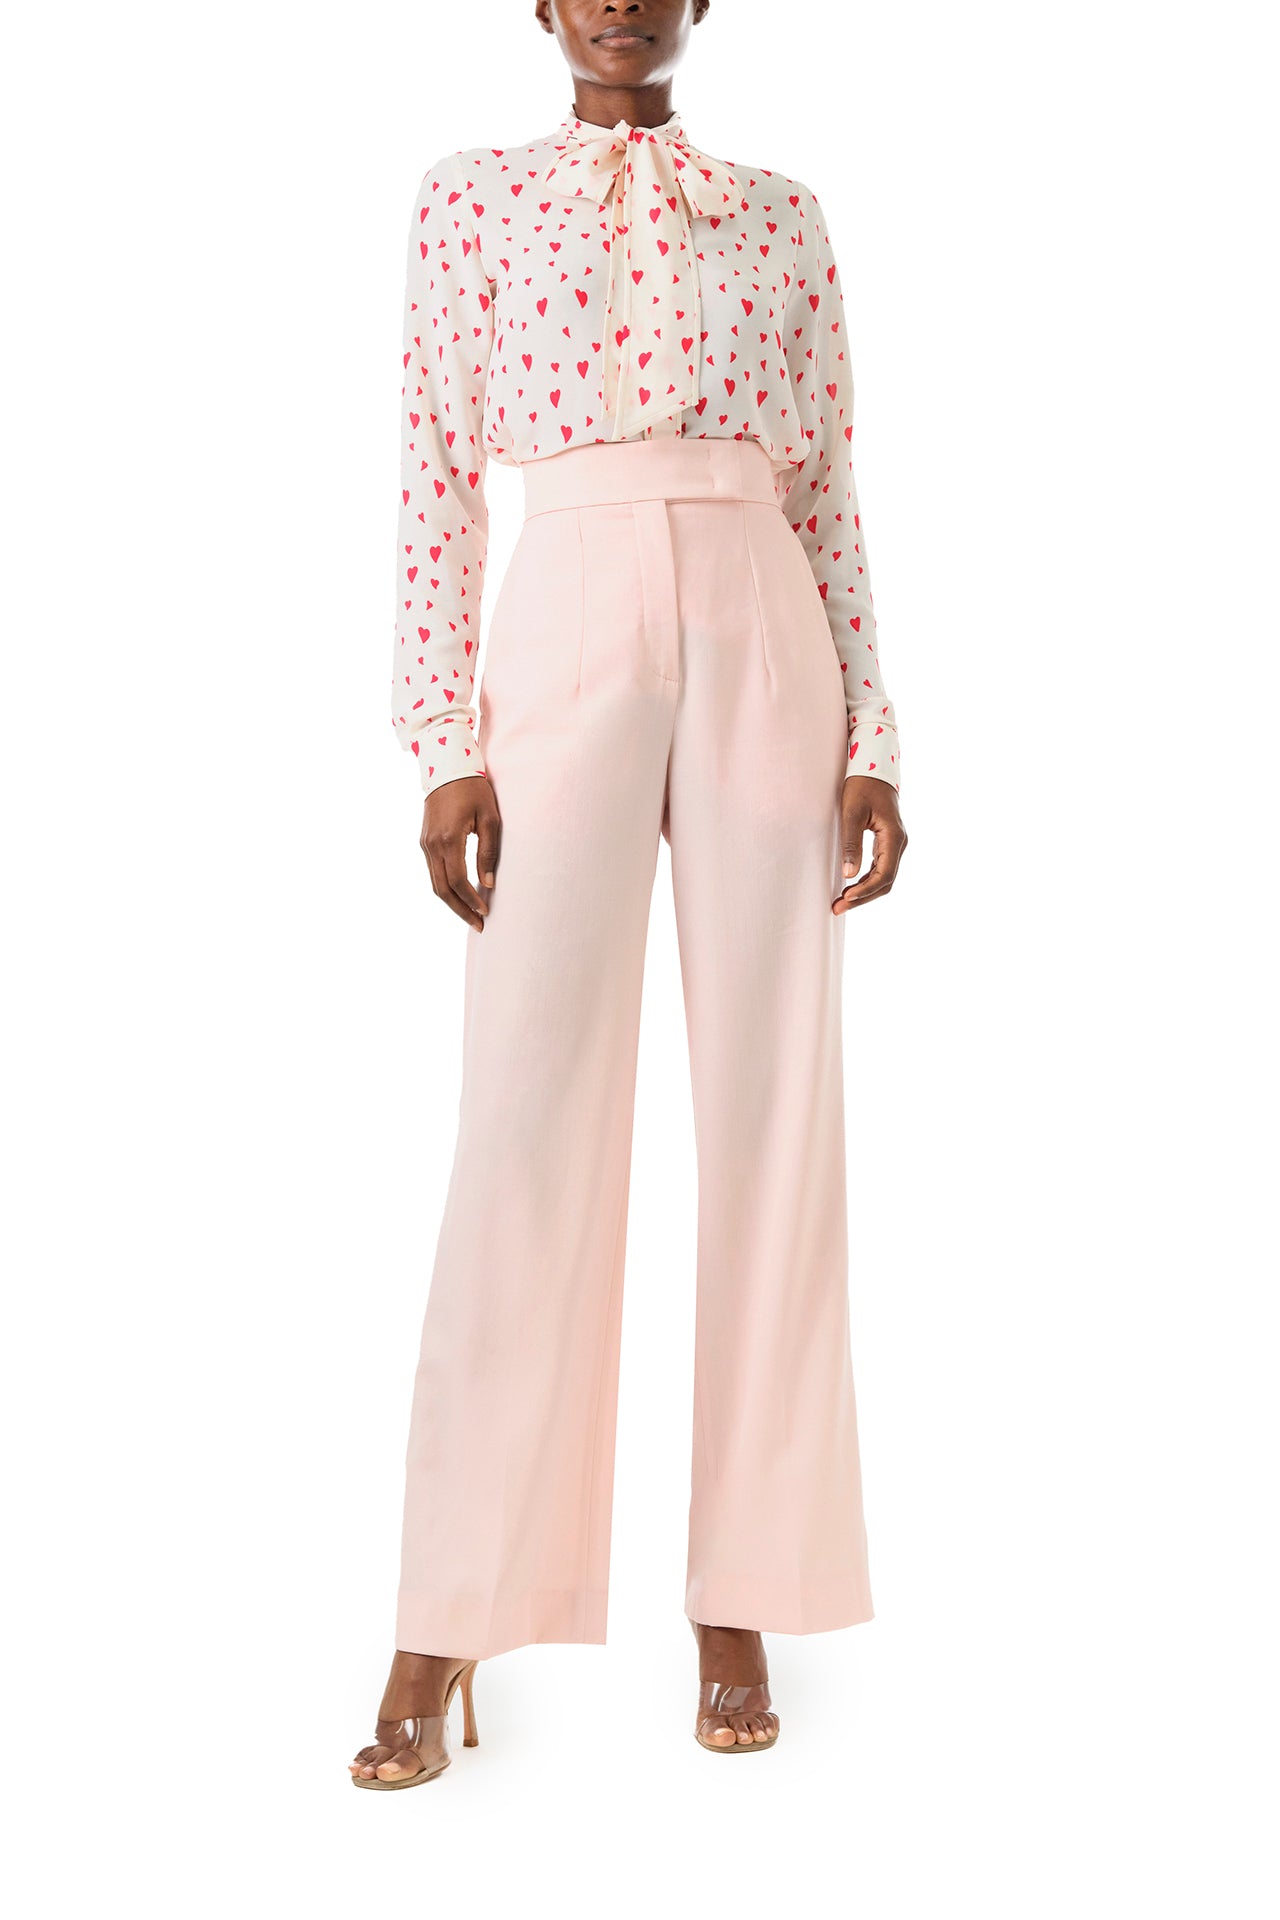 Monique Lhuillier Fall 2024 pale blush wool, straight leg trouser with pockets - front with heart print blouse.